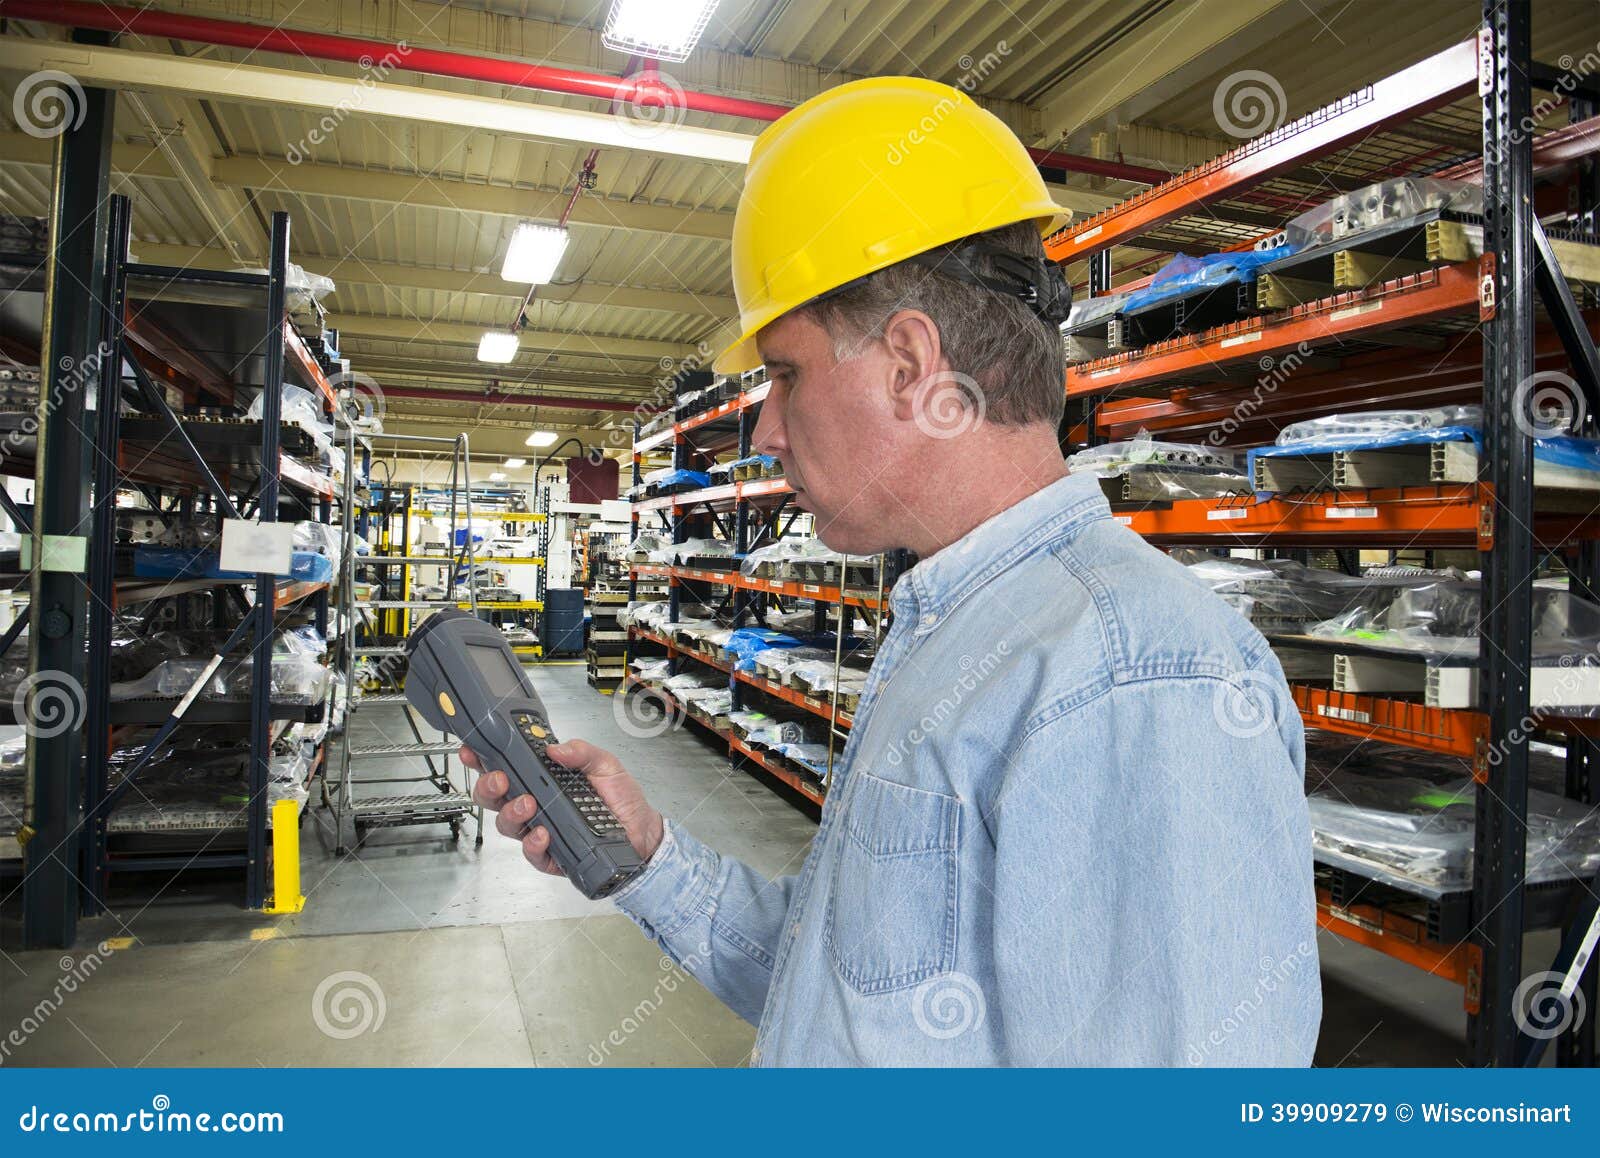 Industrial Manufacturing Inventory Warehouse Worke Stock